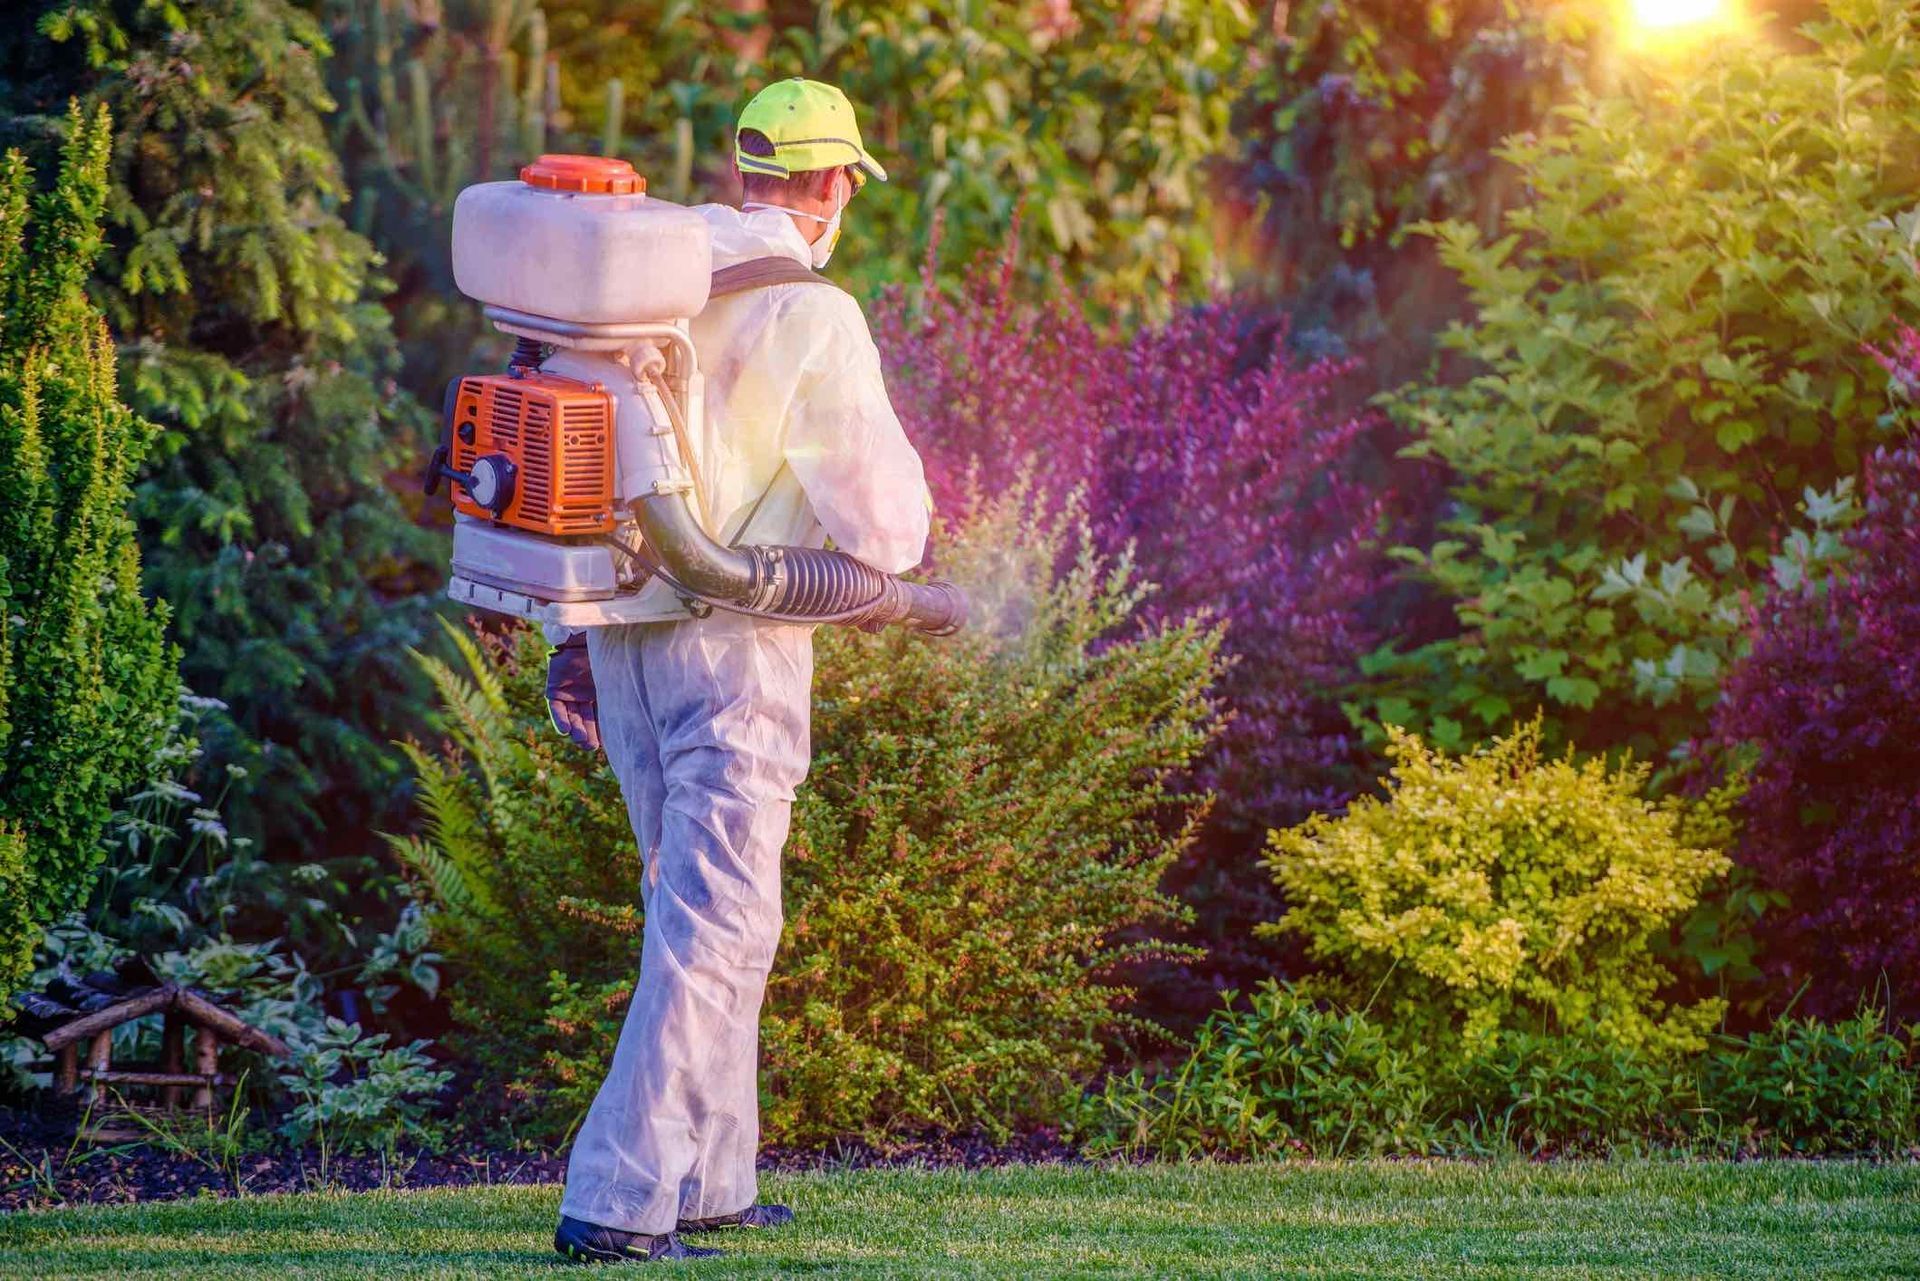 Learn how to prevent and control insects and pests.